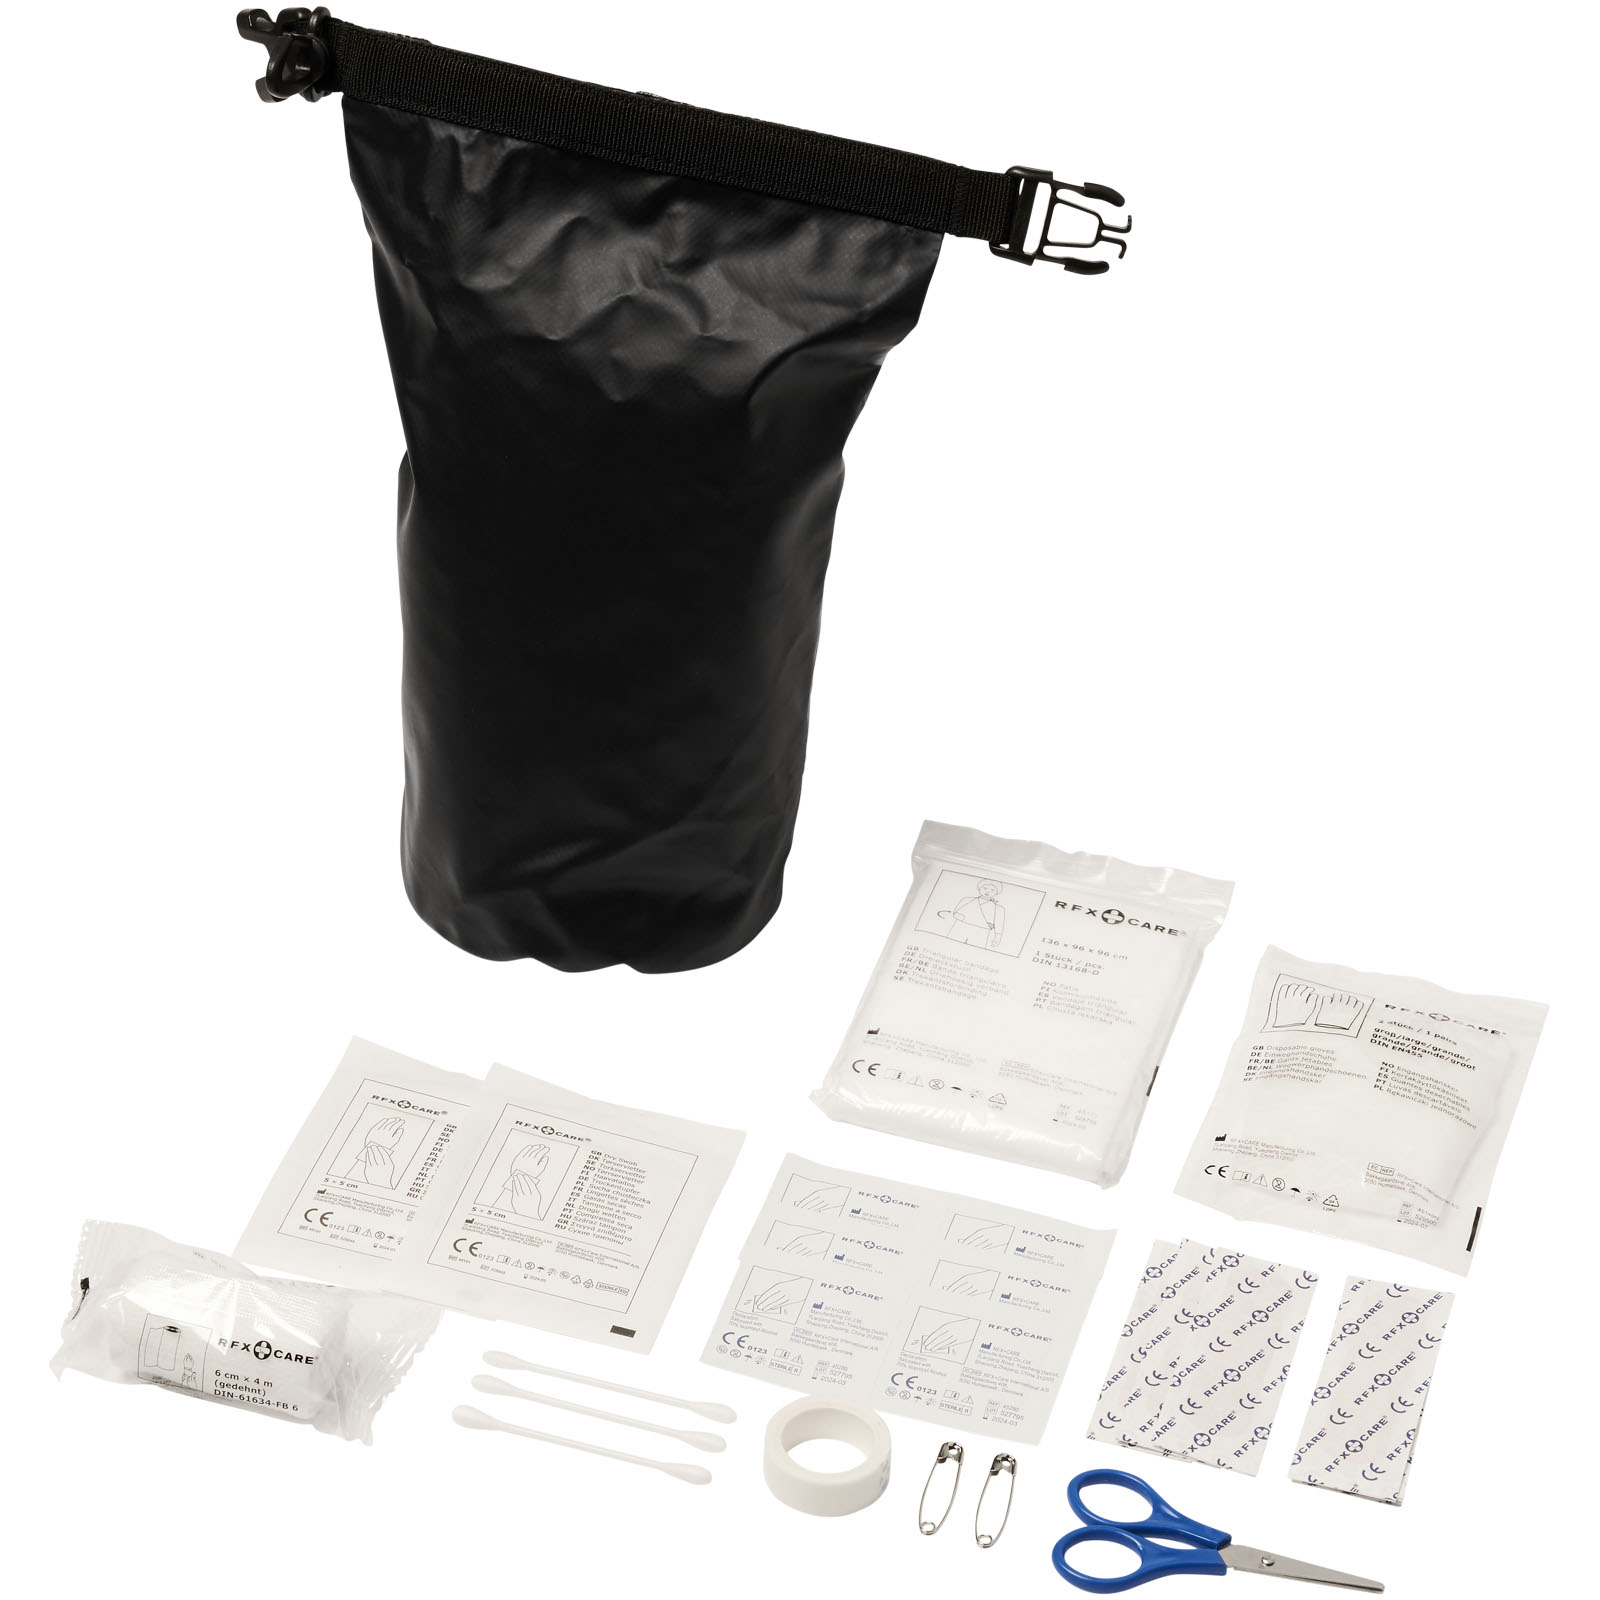 Waterproof first aid kit CONNER, 30 components